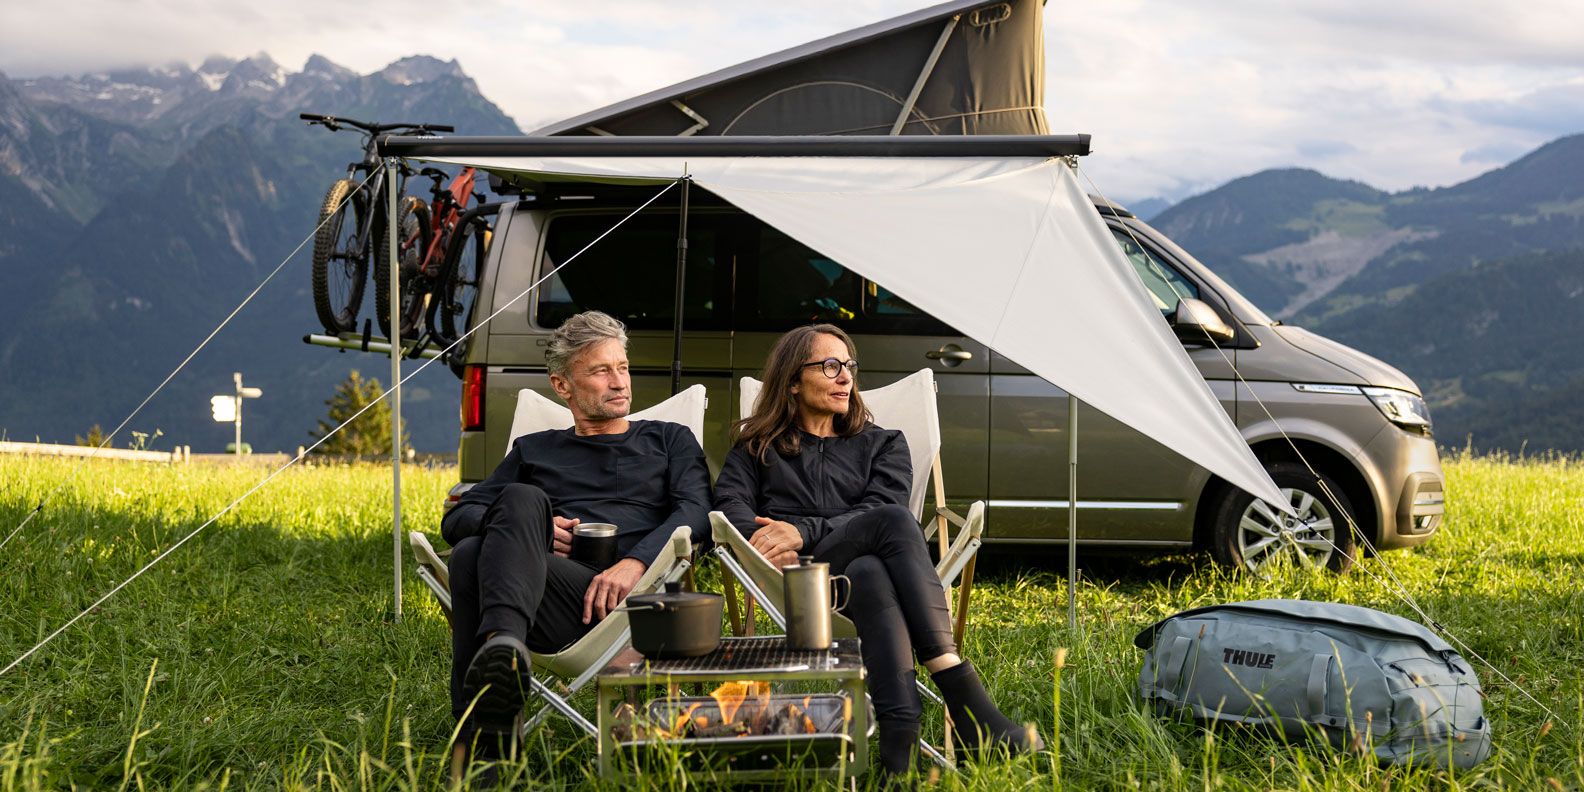 A man and woman sit in camping chairs in front of their compact van with a Thule Subsola awning panel.